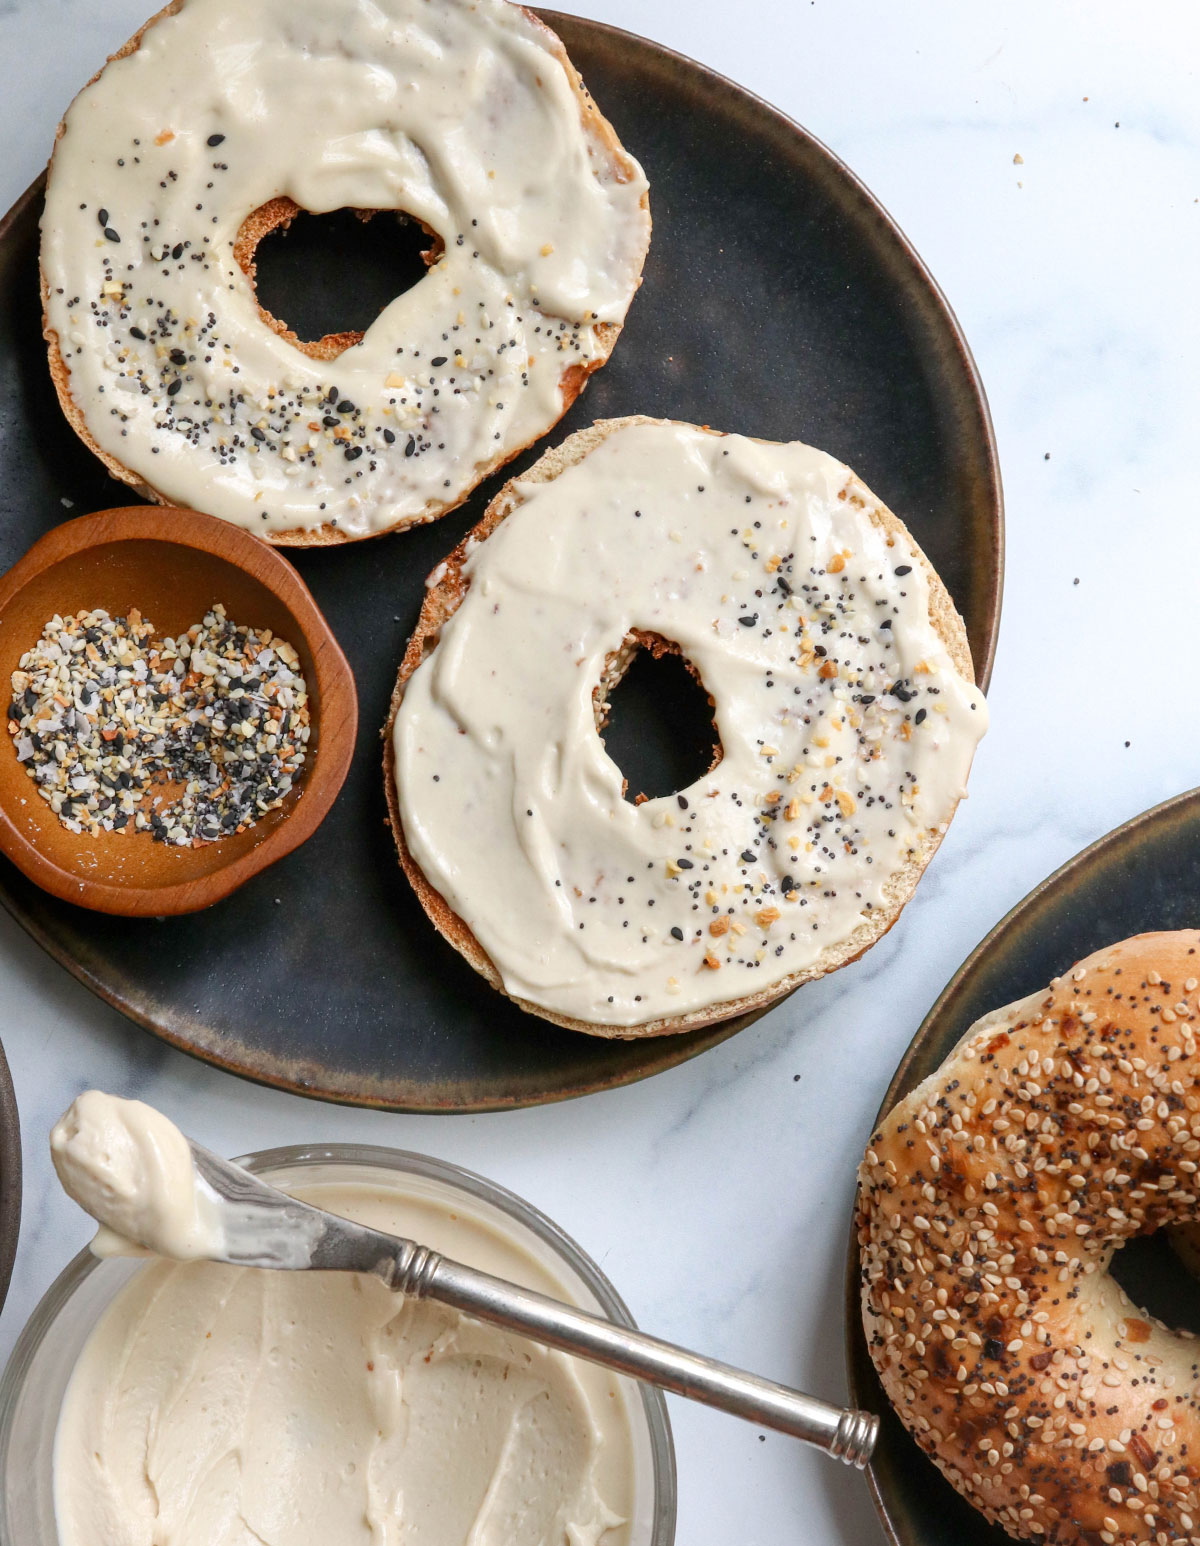 vegan cream cheese spread on a bagel with everything seasoning